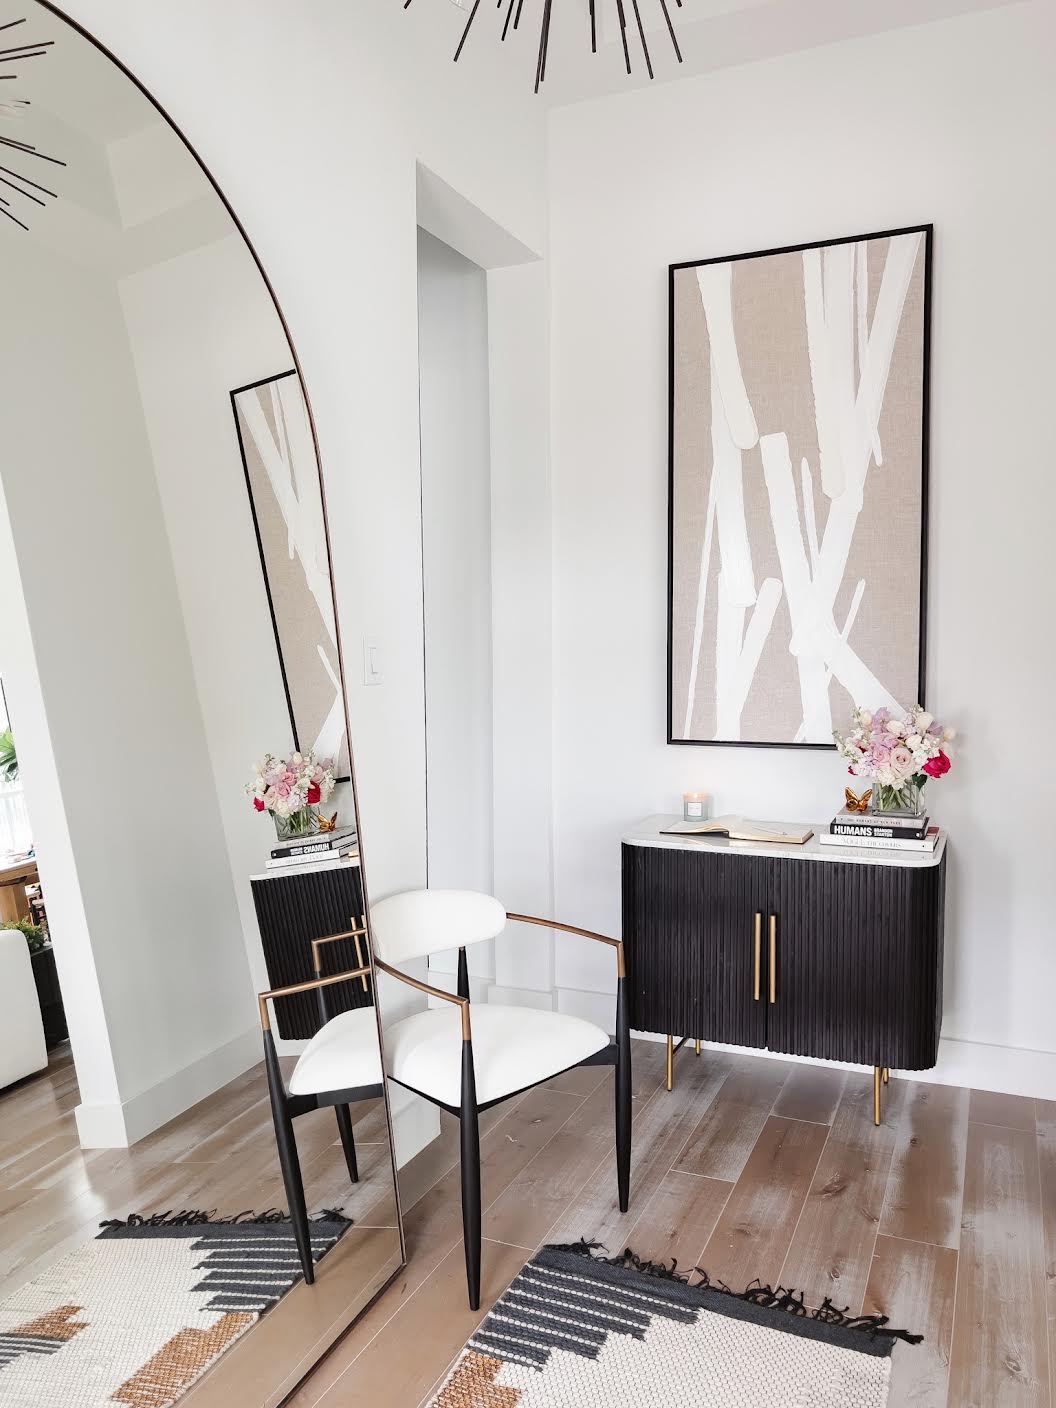 Blogger Hoang-Kim Cung's entryway decor in her transitional home in Dallas, Texas